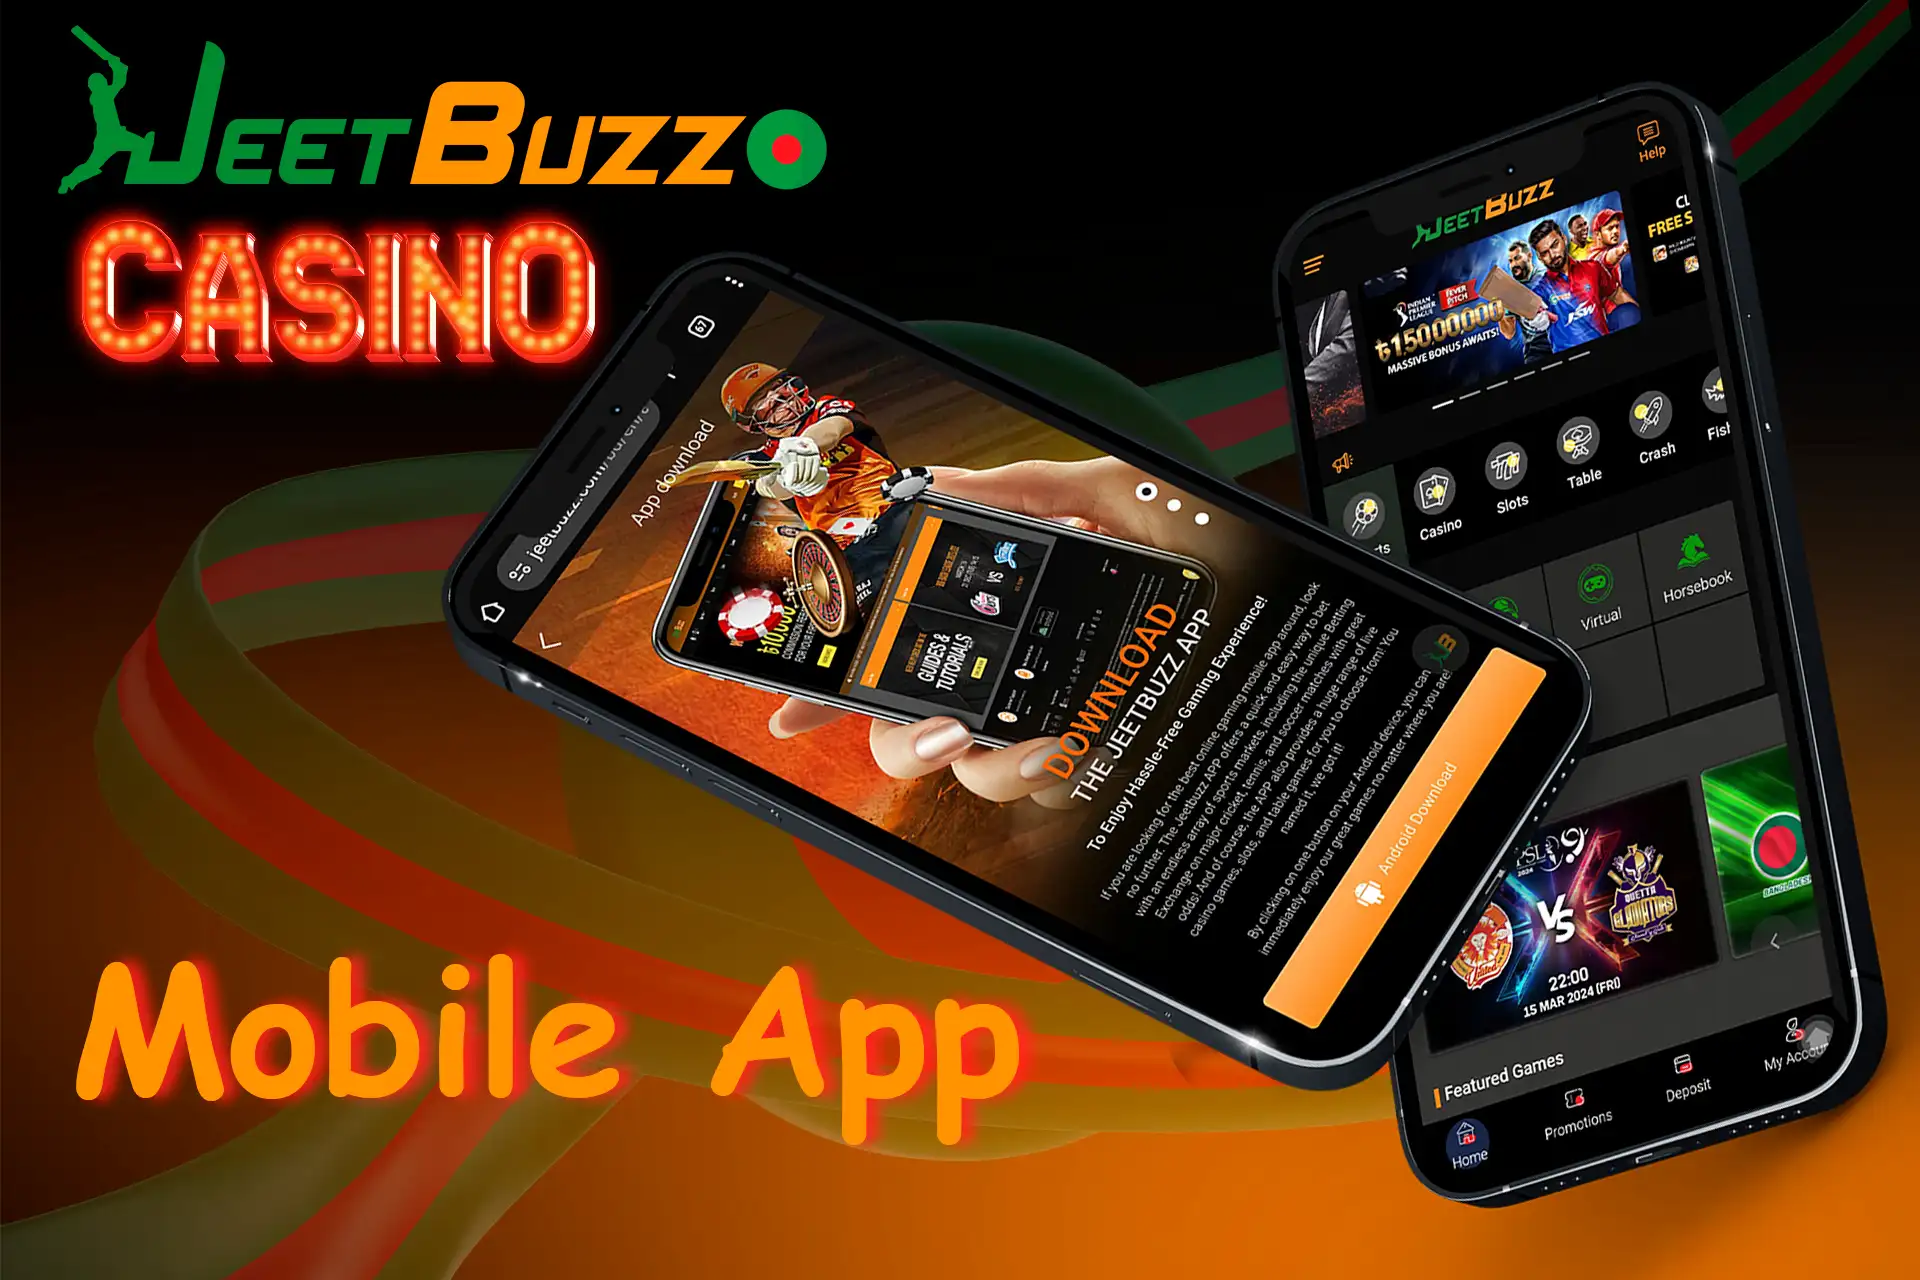 The bookmaker has provided a mobile application for Android users